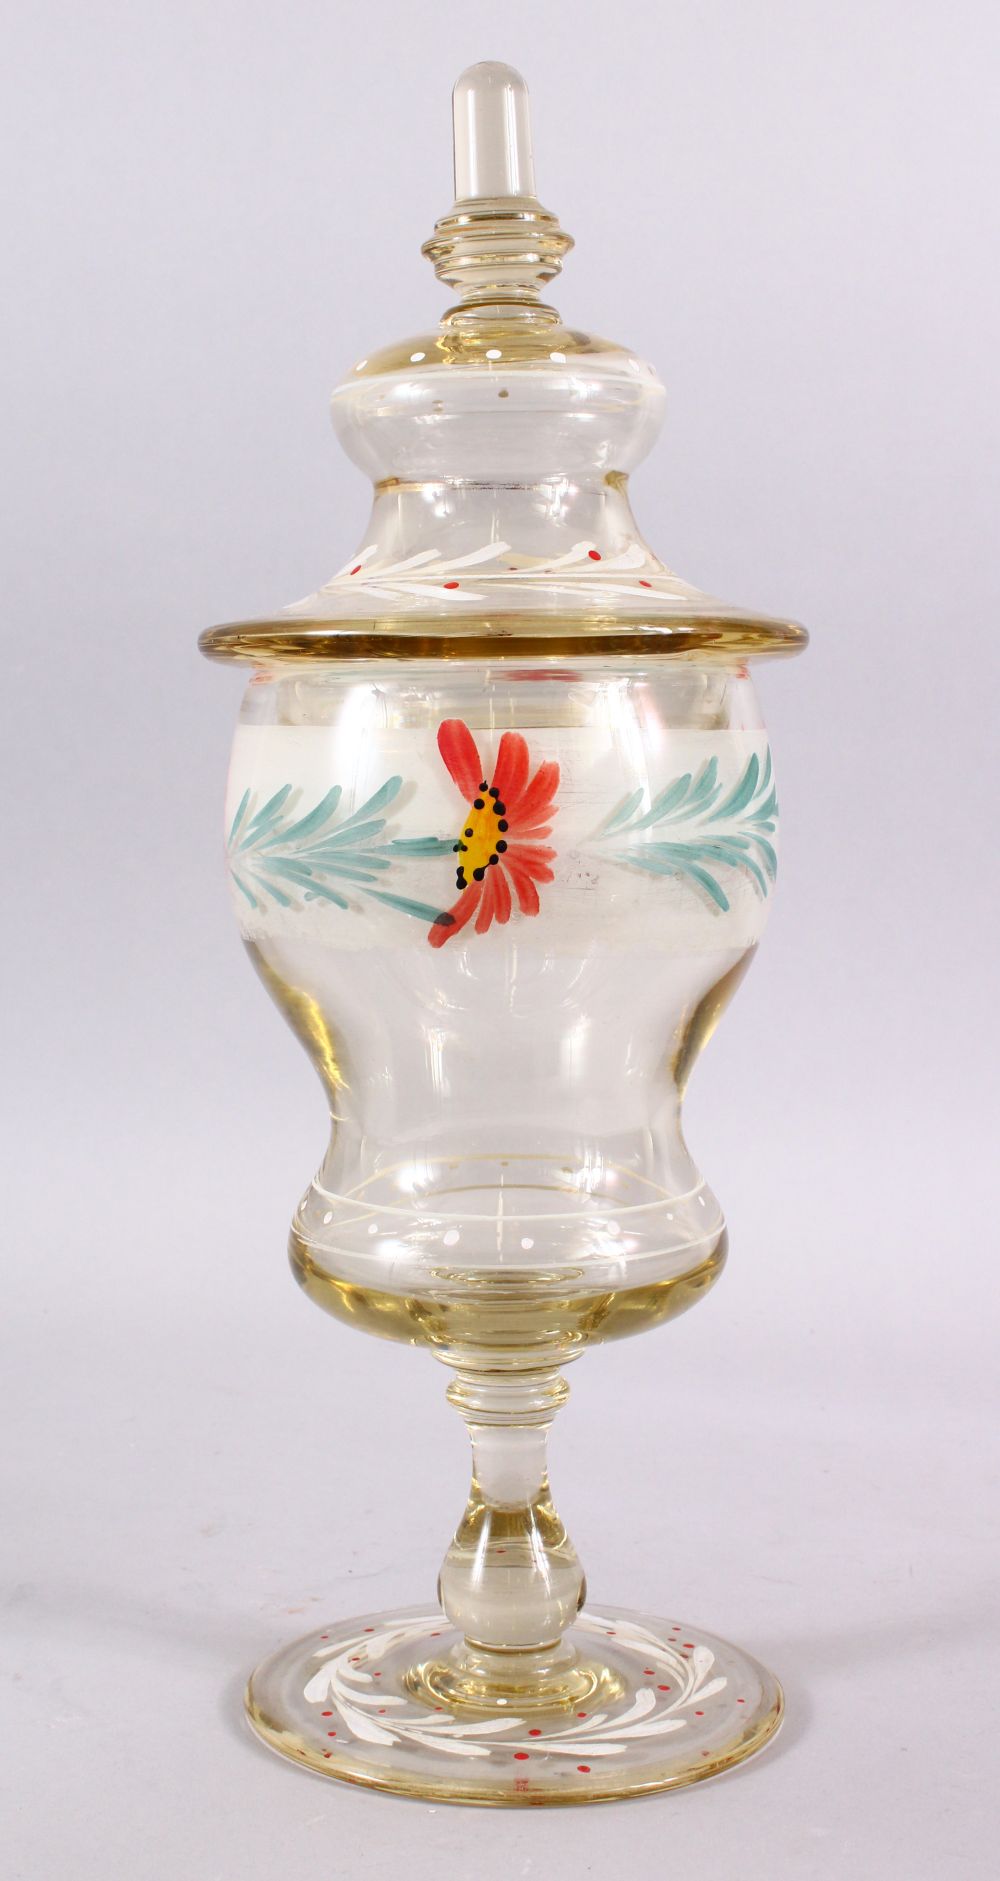 A 19TH CENTURY ENAMELED POSS MOSER GLASS VASE & COVER, with enameled floral decoration and gilt